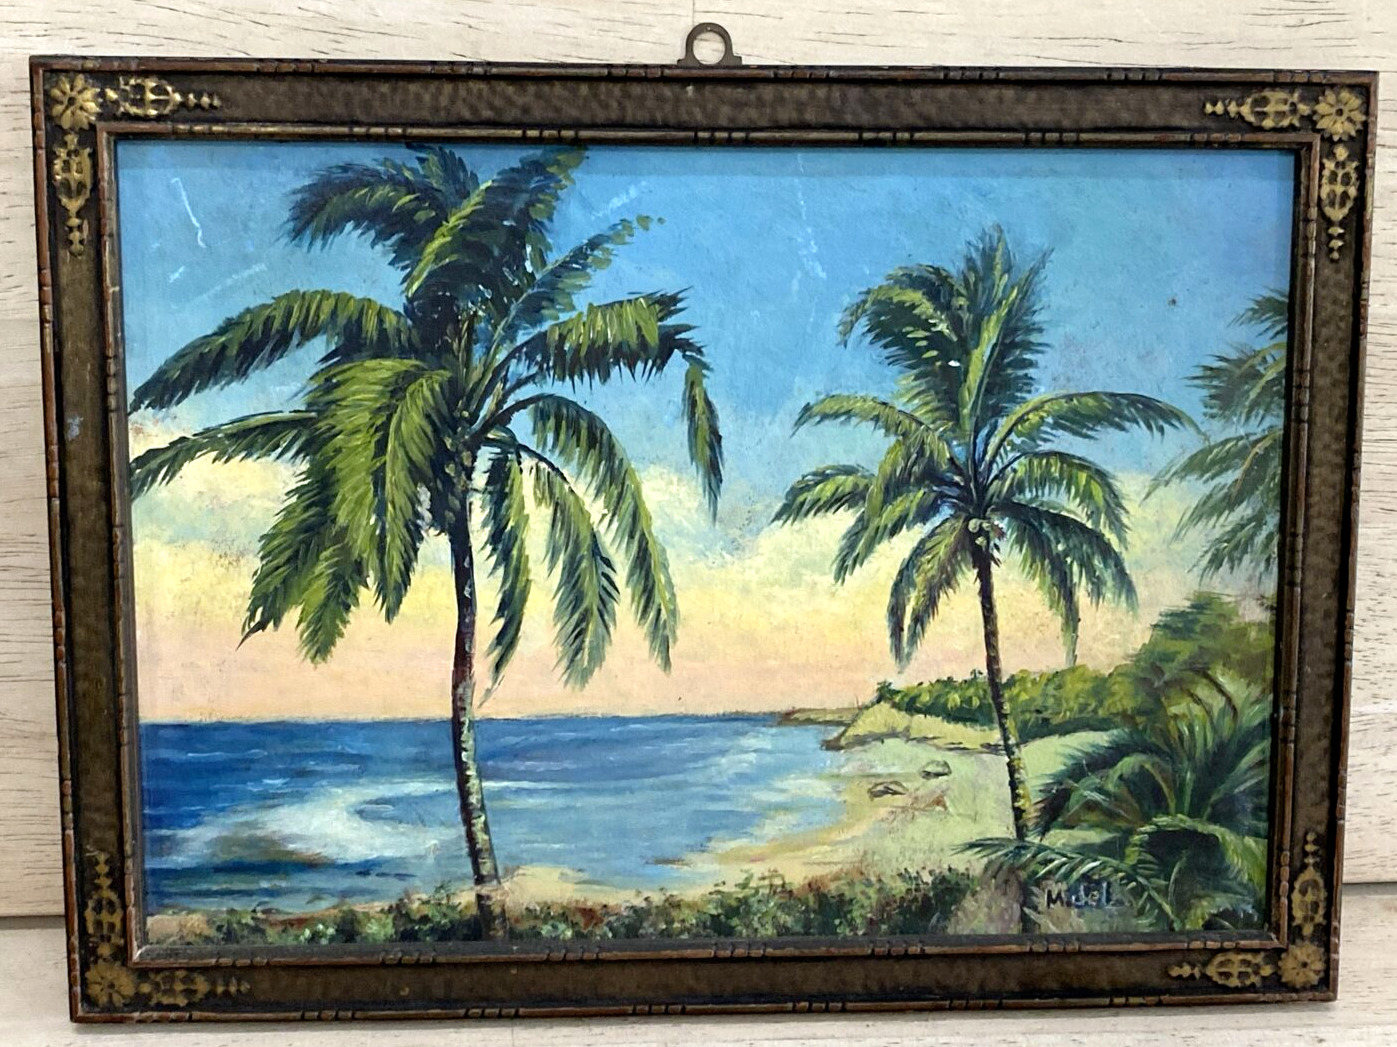 EARLY Antique CARVED Wood Frame 11x8 - Beach Art Painting - Date on back 1887